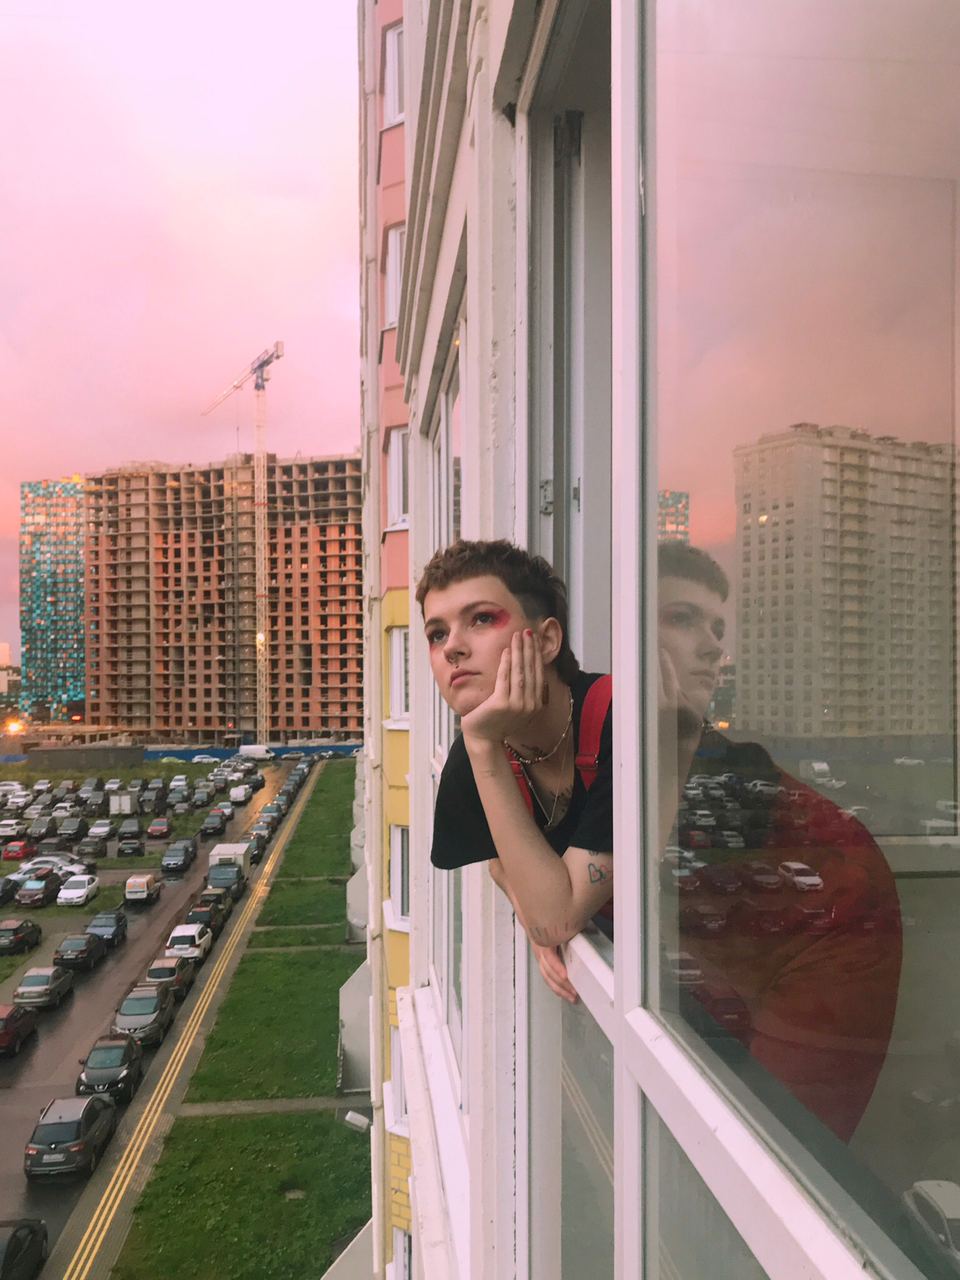 <p><b></b></p>

<p><span>This portrait of a non-binary queer activist Katya Voziyanova was taken by their friend Sam on the morning after their 21st birthday. The photo was taken in St Petersburg, and has a spirit of gentle candid romanticism, taken amid towering housing developments still under construction. “I think this picture was taken after we had champagne and cigarettes for breakfast. It was the morning after my birthday and it was our 19th hour of nonstop drinking, because that’s what you do when you turn 21. It was a good day in the midst of the end of the world,” Voziyanova remembers. </span></p>